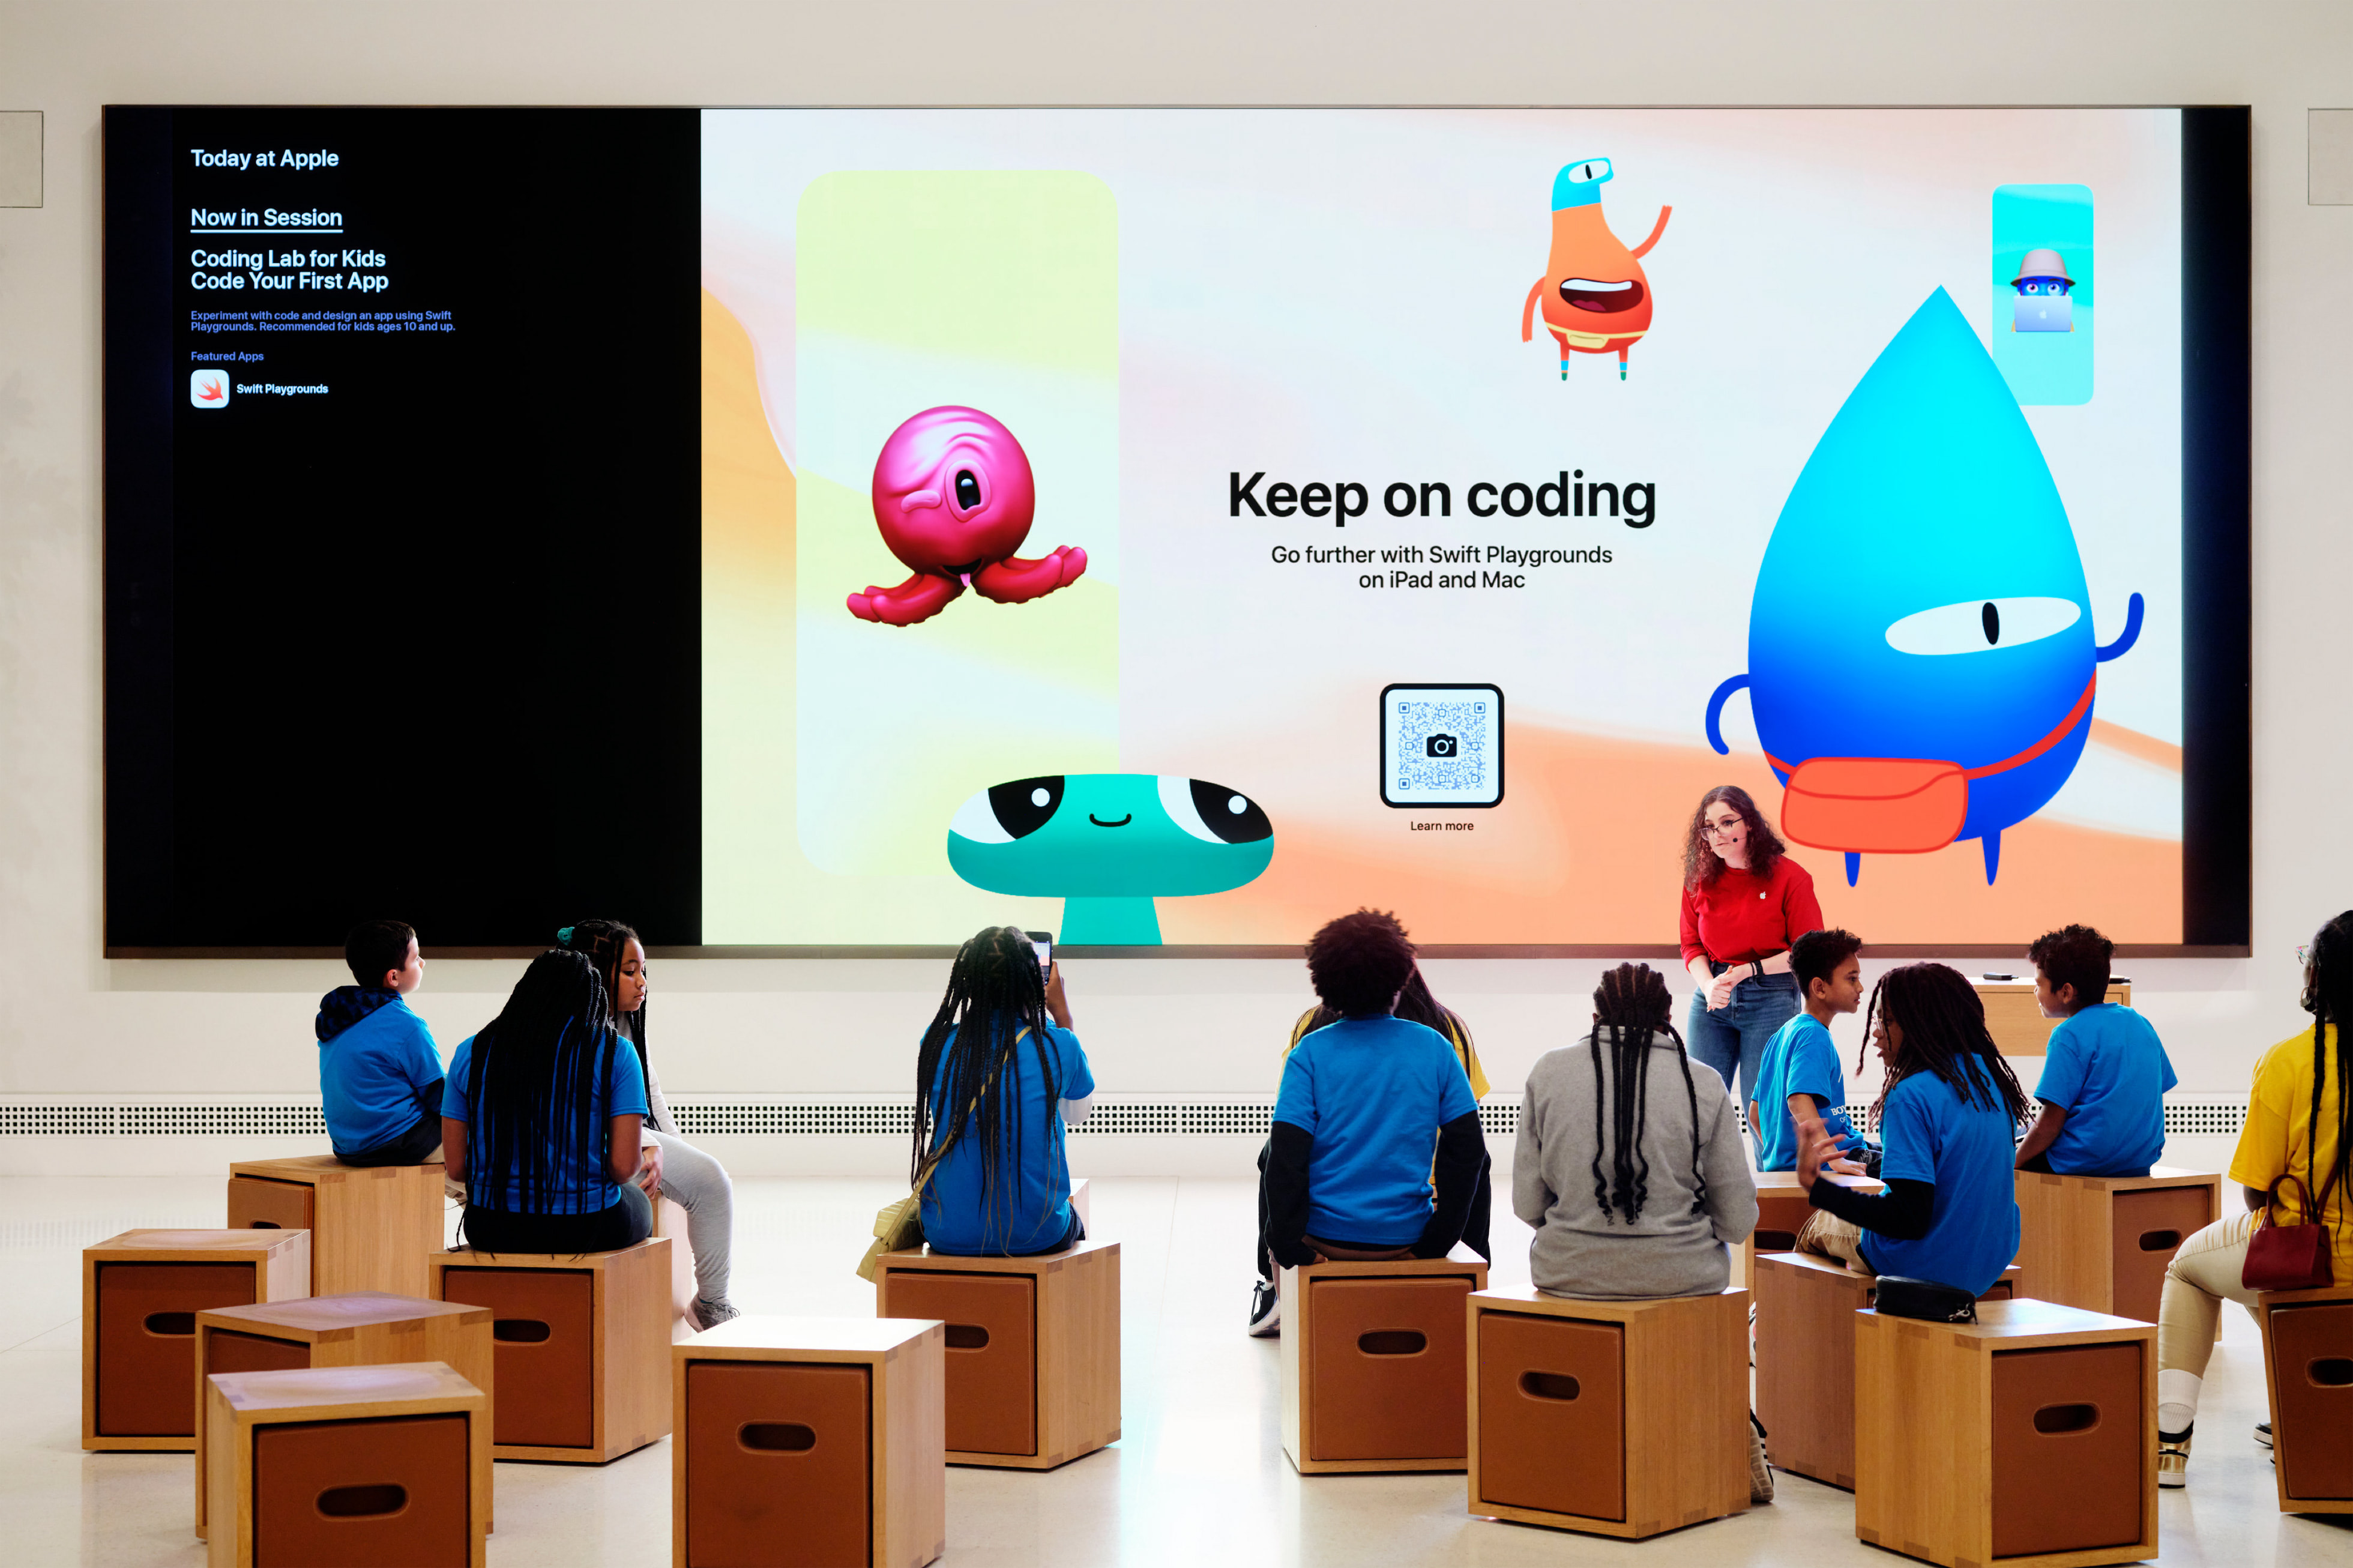 Apple expands its coding education resources with a new Today at